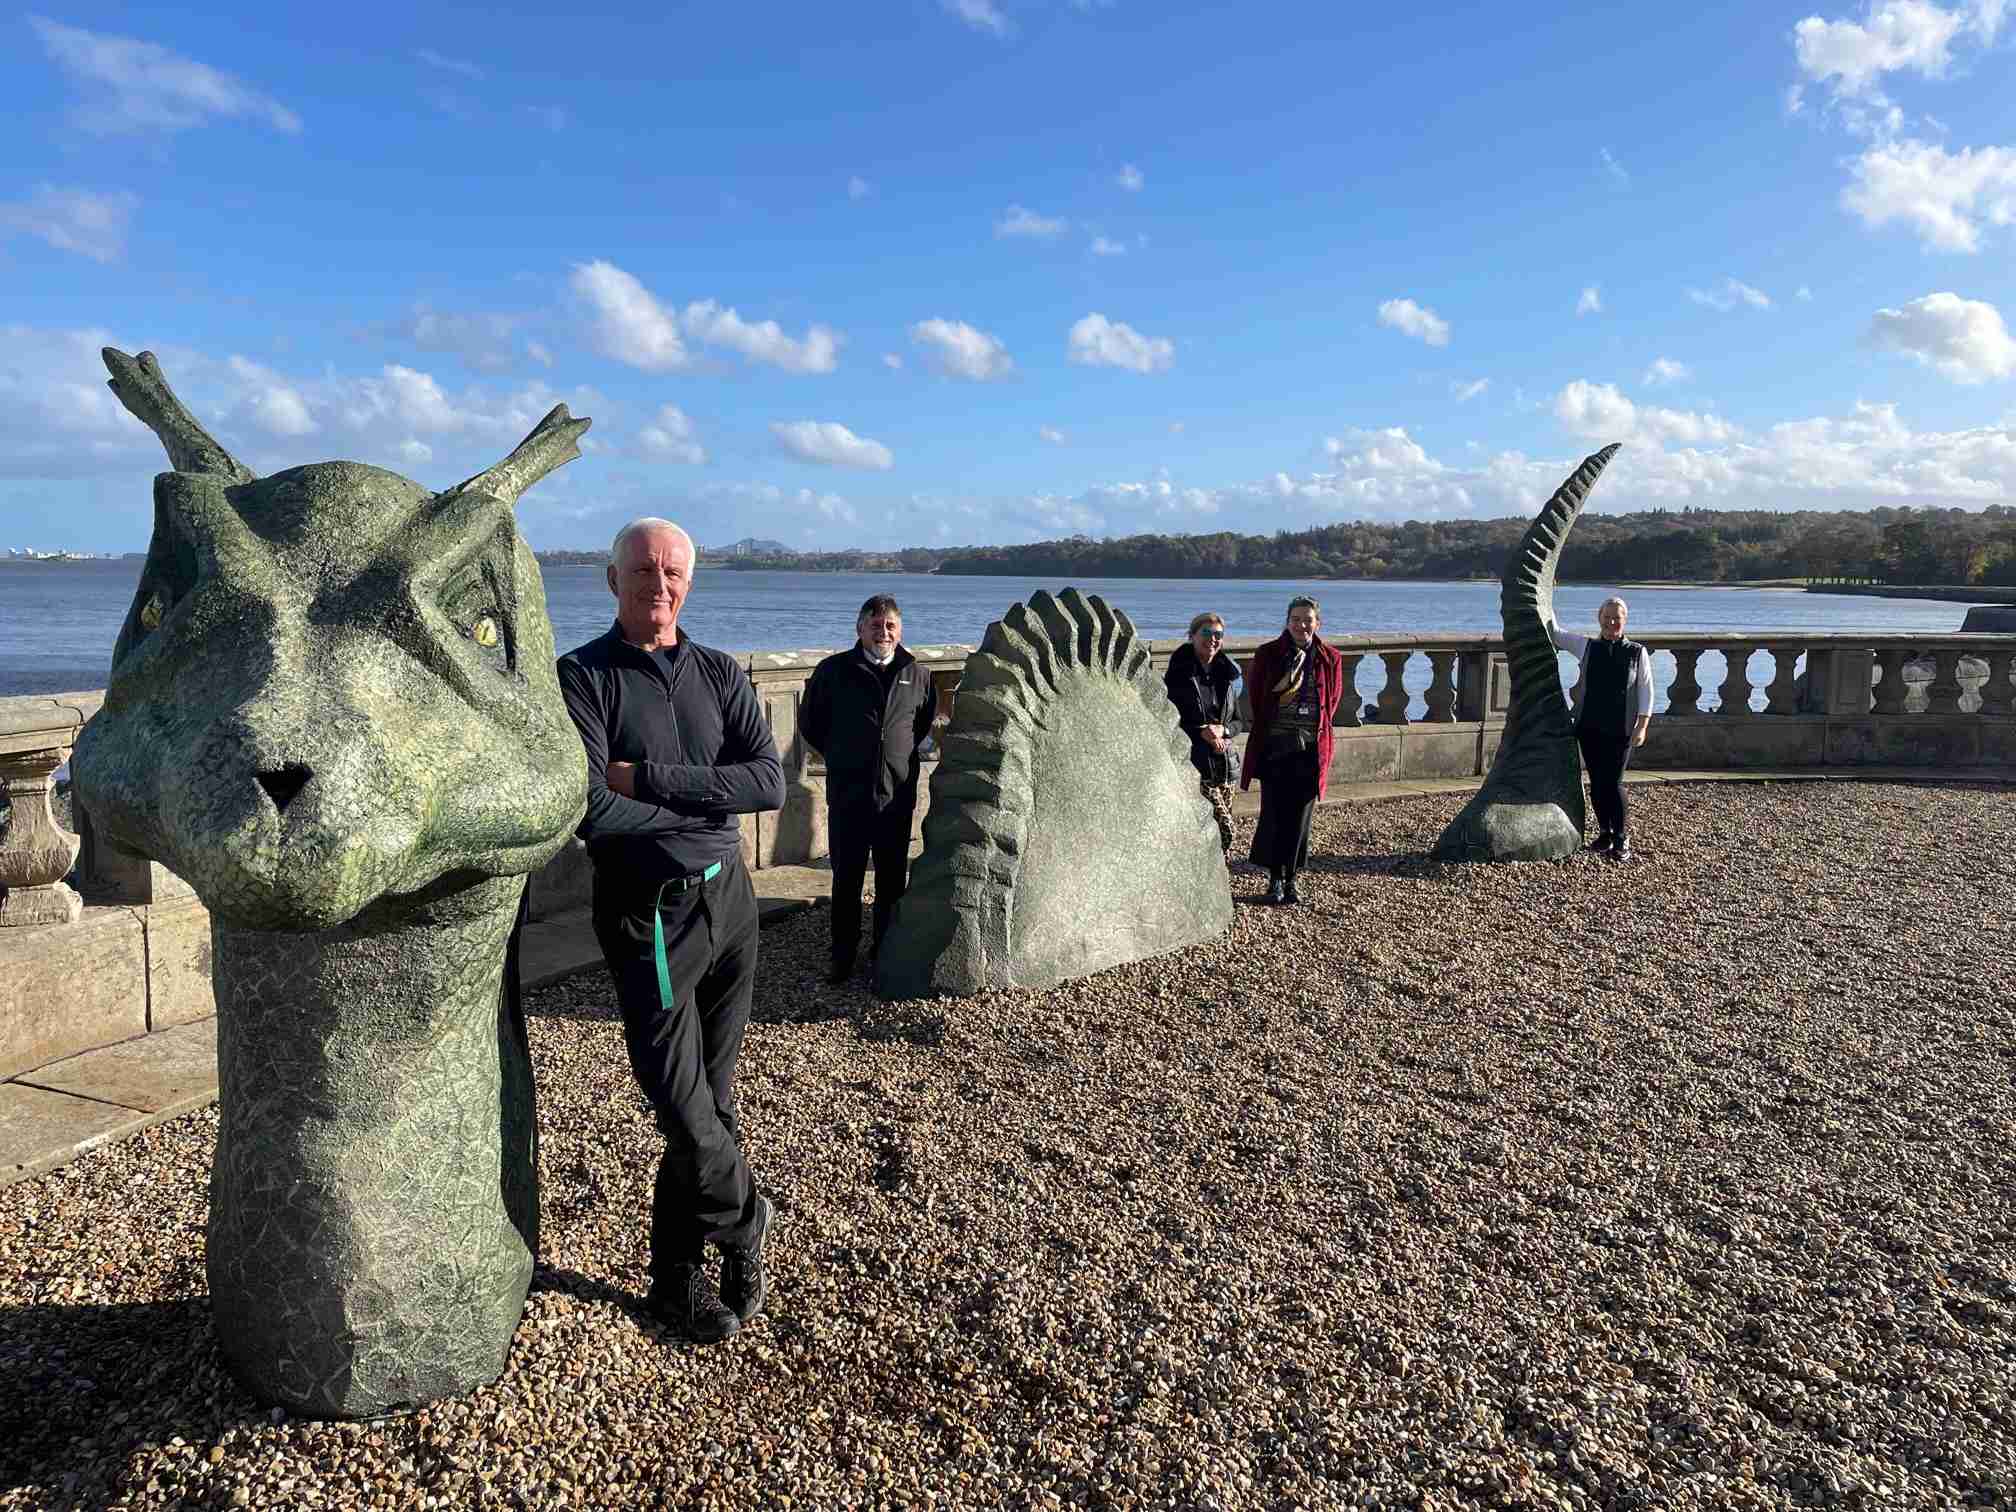 Largest Search for Loch Ness Monster in 5 Decades Begins